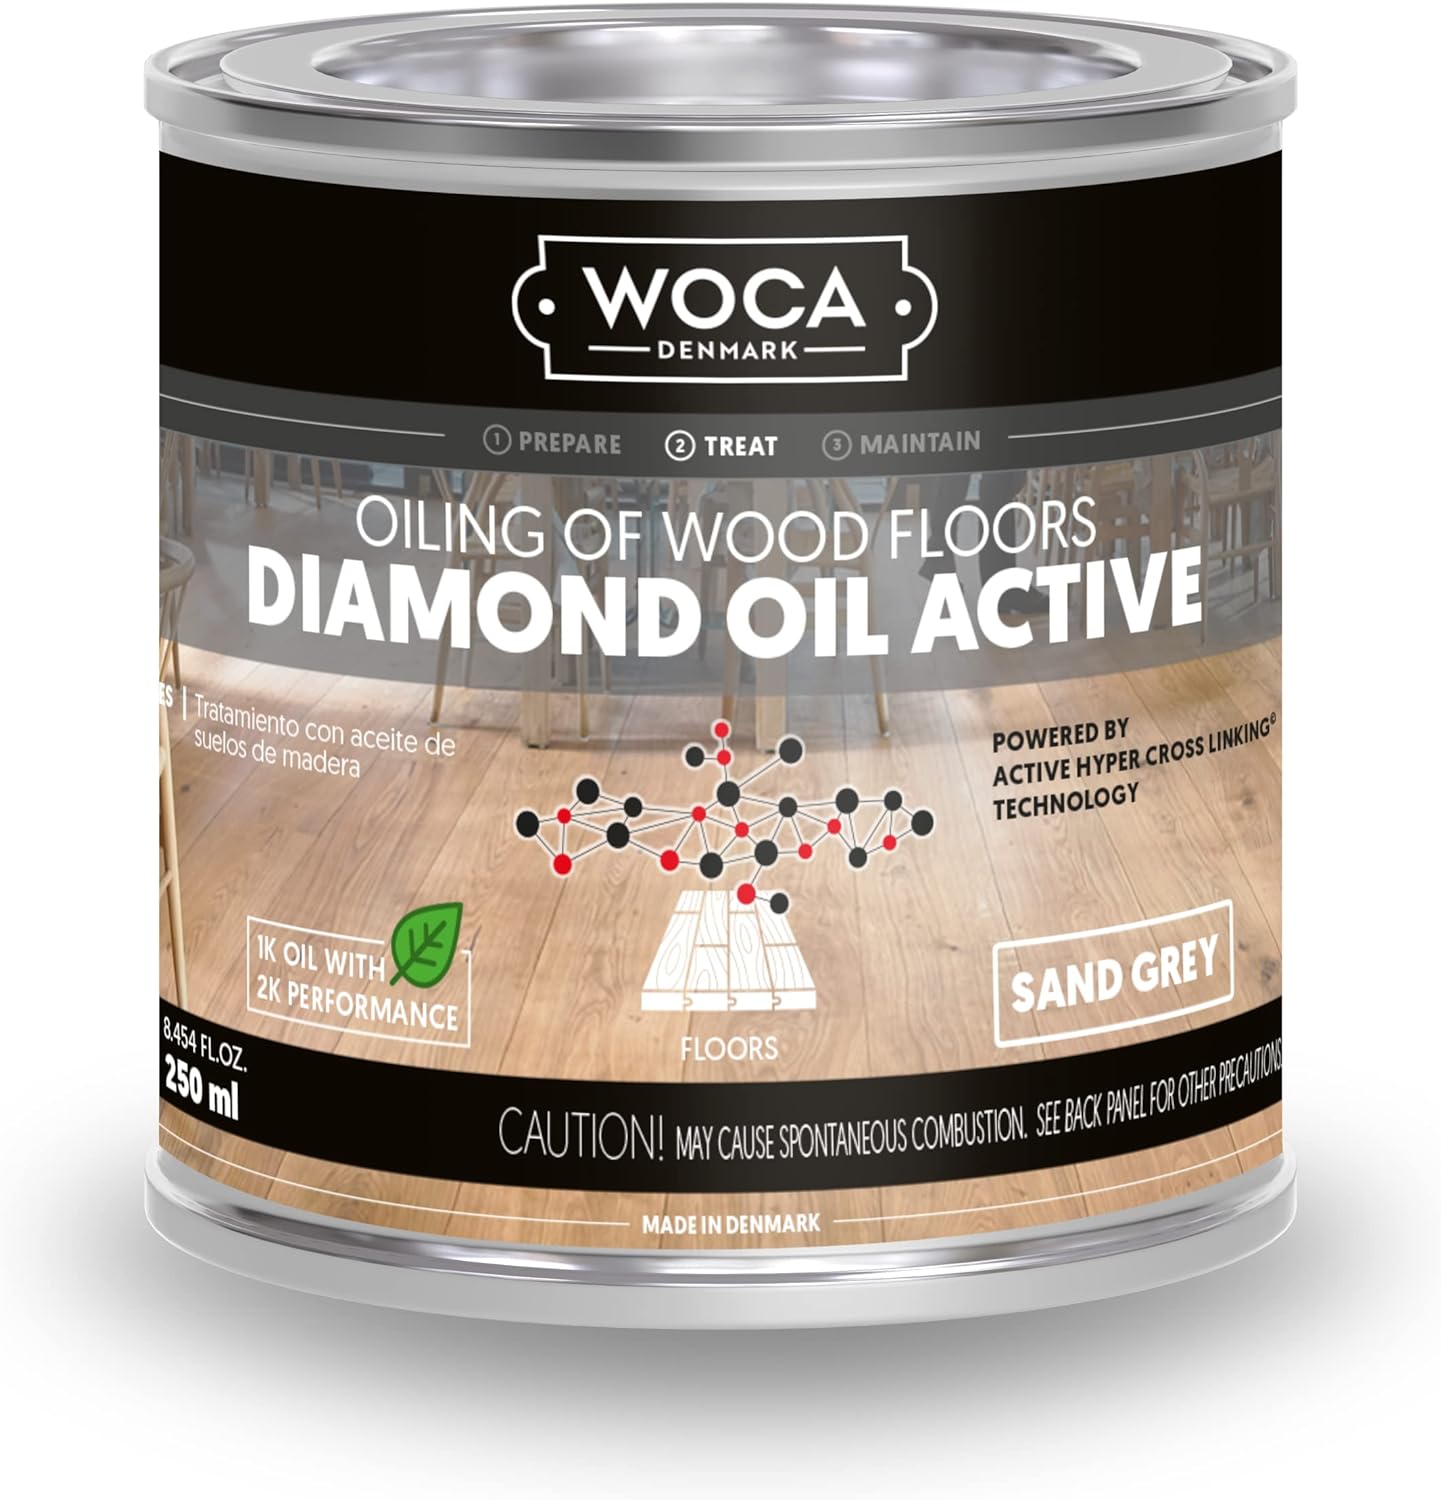 WOCA Denmark Diamond Oil Active, Sand Grey |250 ml| Wood Finish - Low VOC Plant Based Penetrating Wood Oil for Untreated, New, or Newly-Sanded Wooden Surfaces